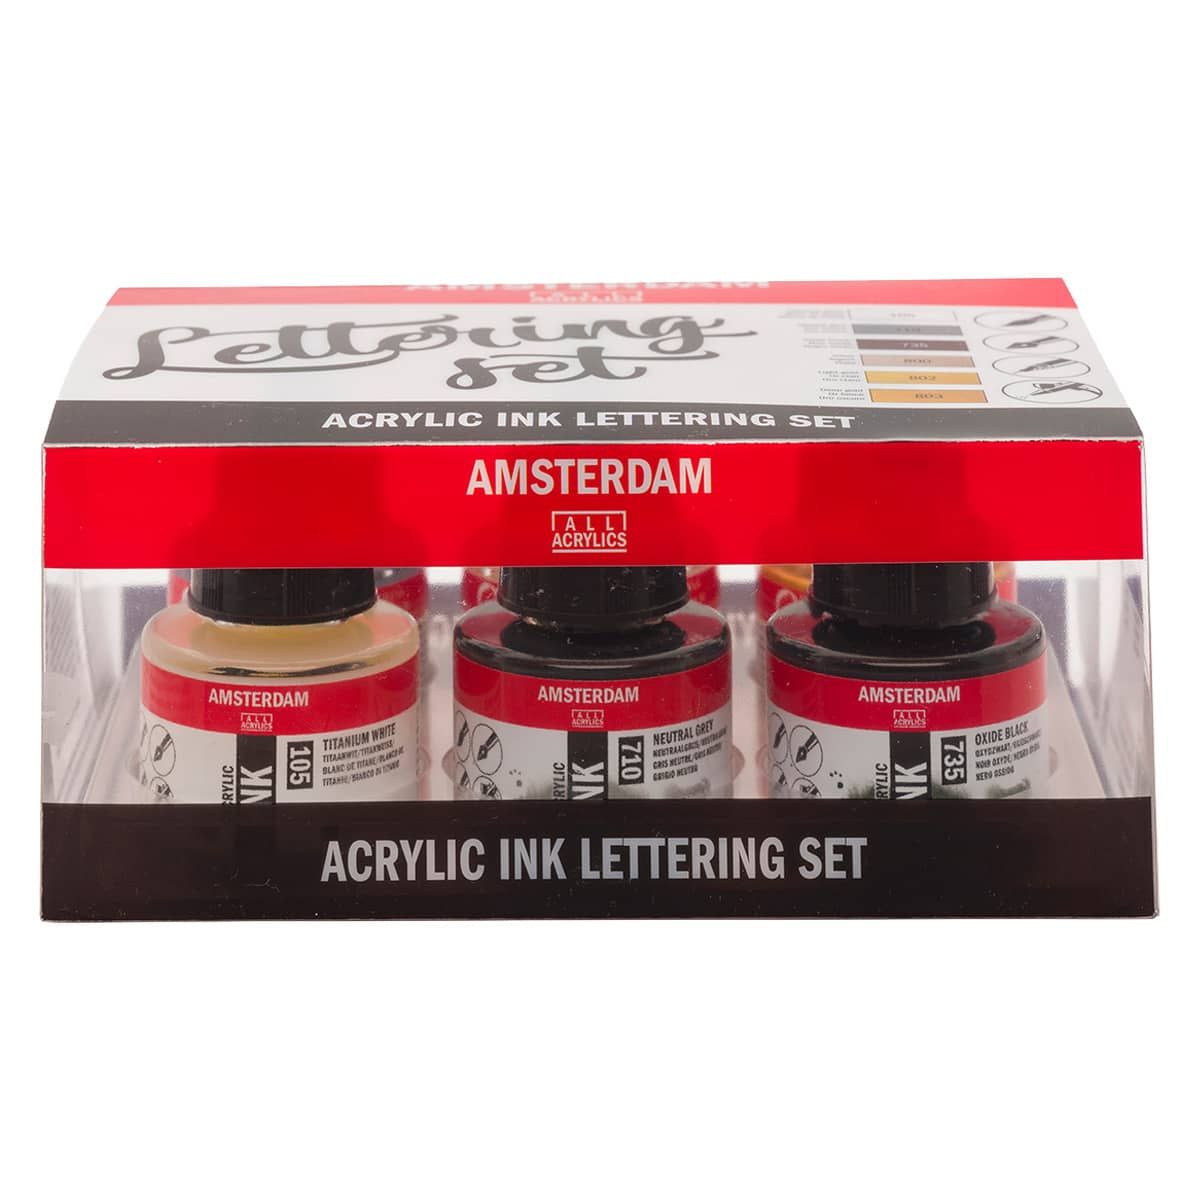 Amsterdam Acrylic Ink Lettering Set of 6, 30ml